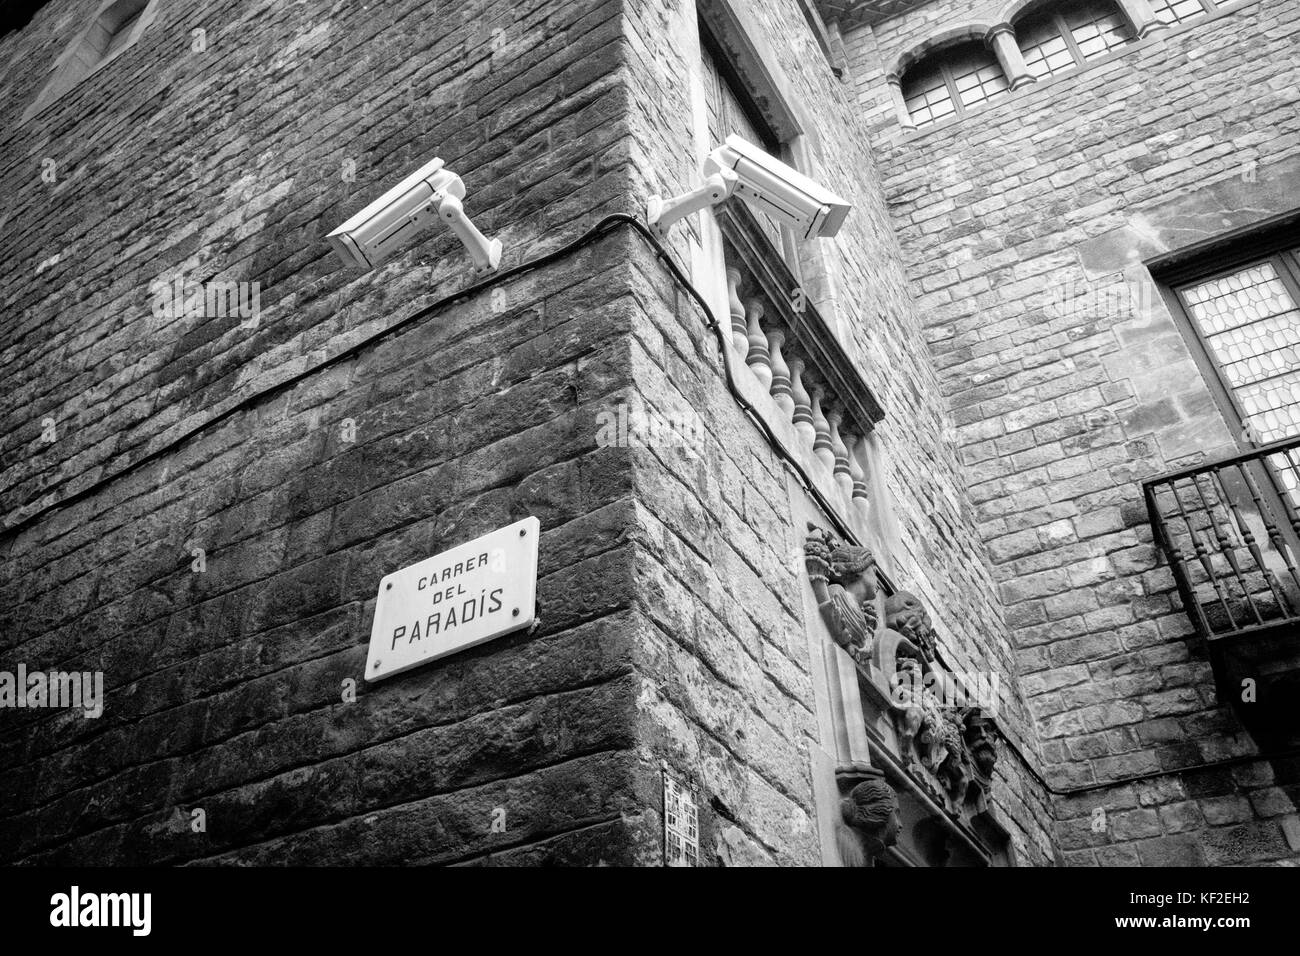 Two CCTV cameras on Carrer Del Paradis, paradise street, in Barcelona, Spain. Stock Photo